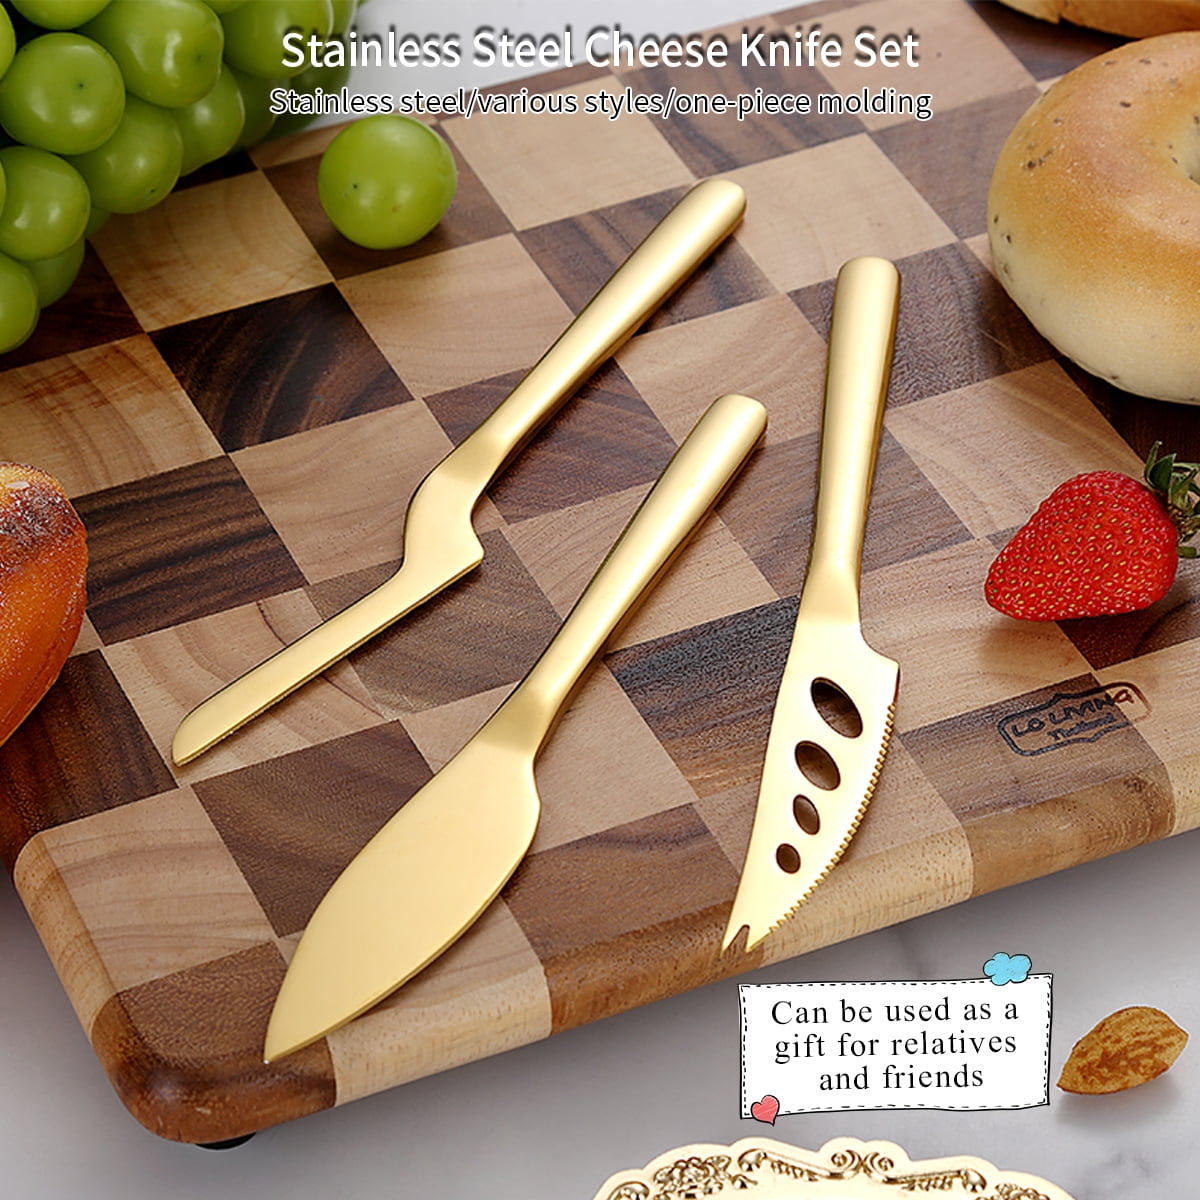 Ravinia Travel Cheese Knife Set and Case